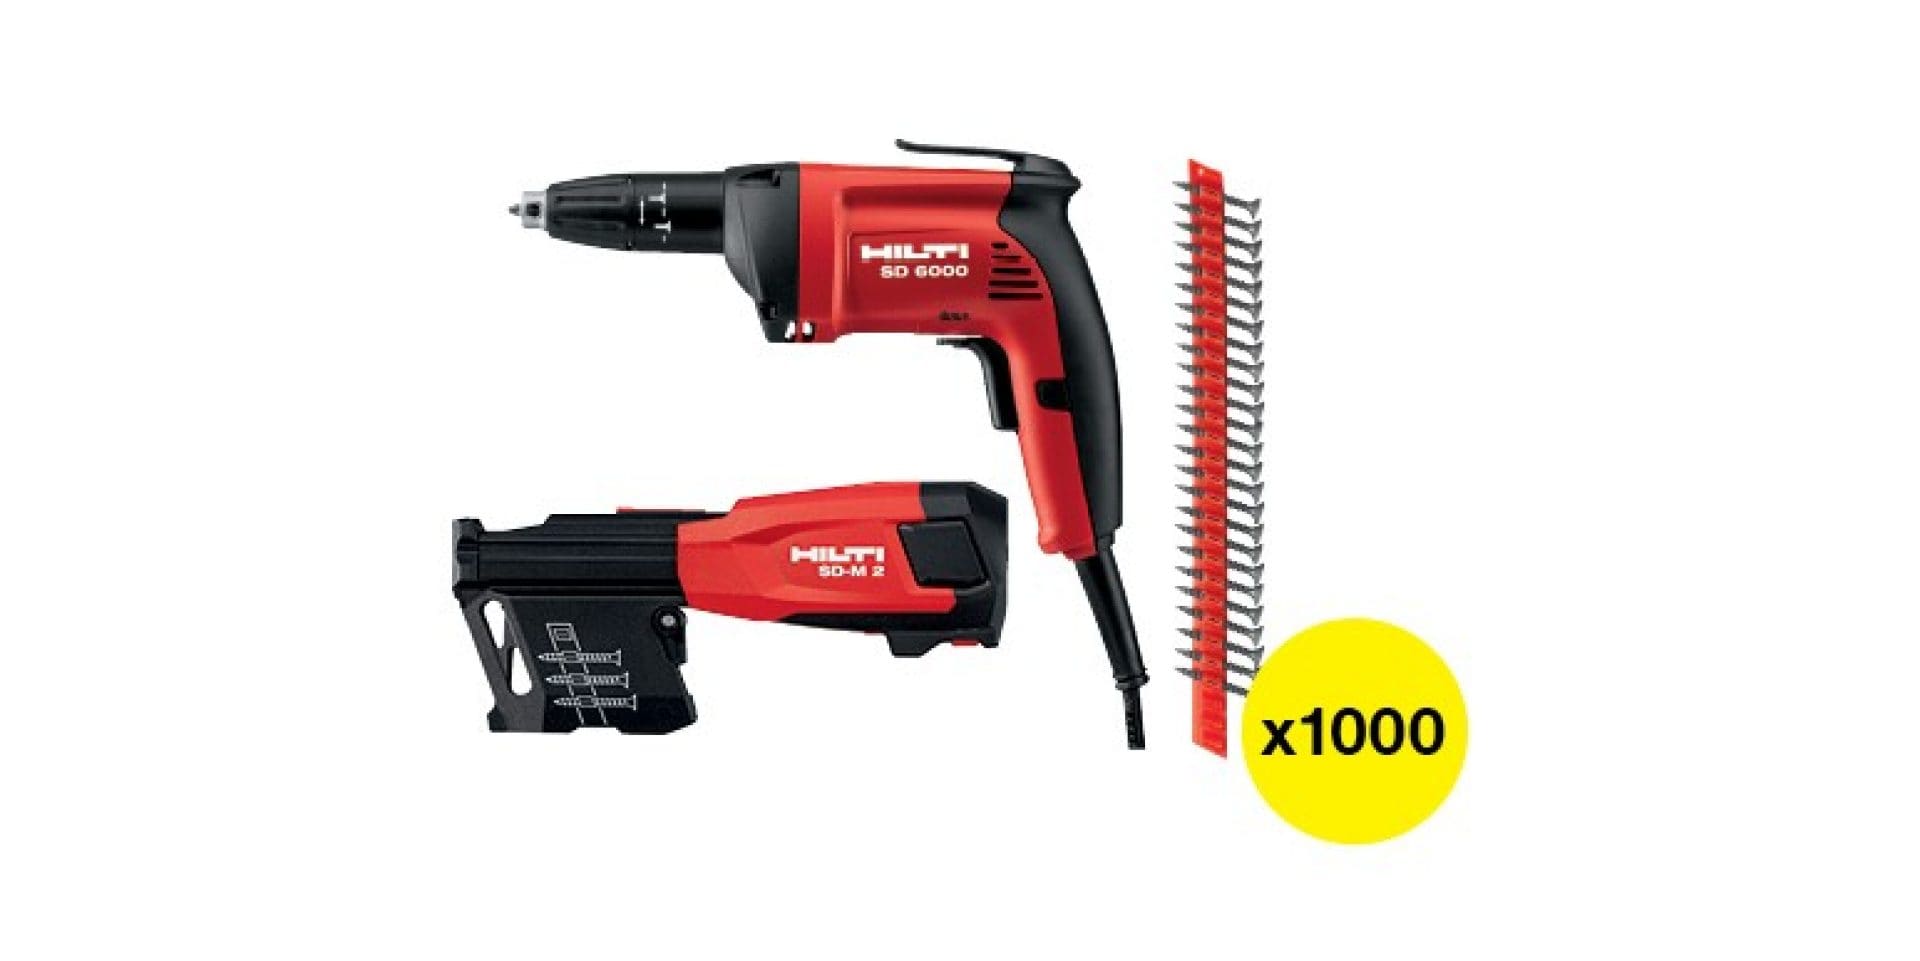 Cordless rotary hammer TE 2-A22 + Cordl. angle grinder AG 4S-A22-125 + Cordl. drill driver SF 4-A22 + Battery pack + Batter charger